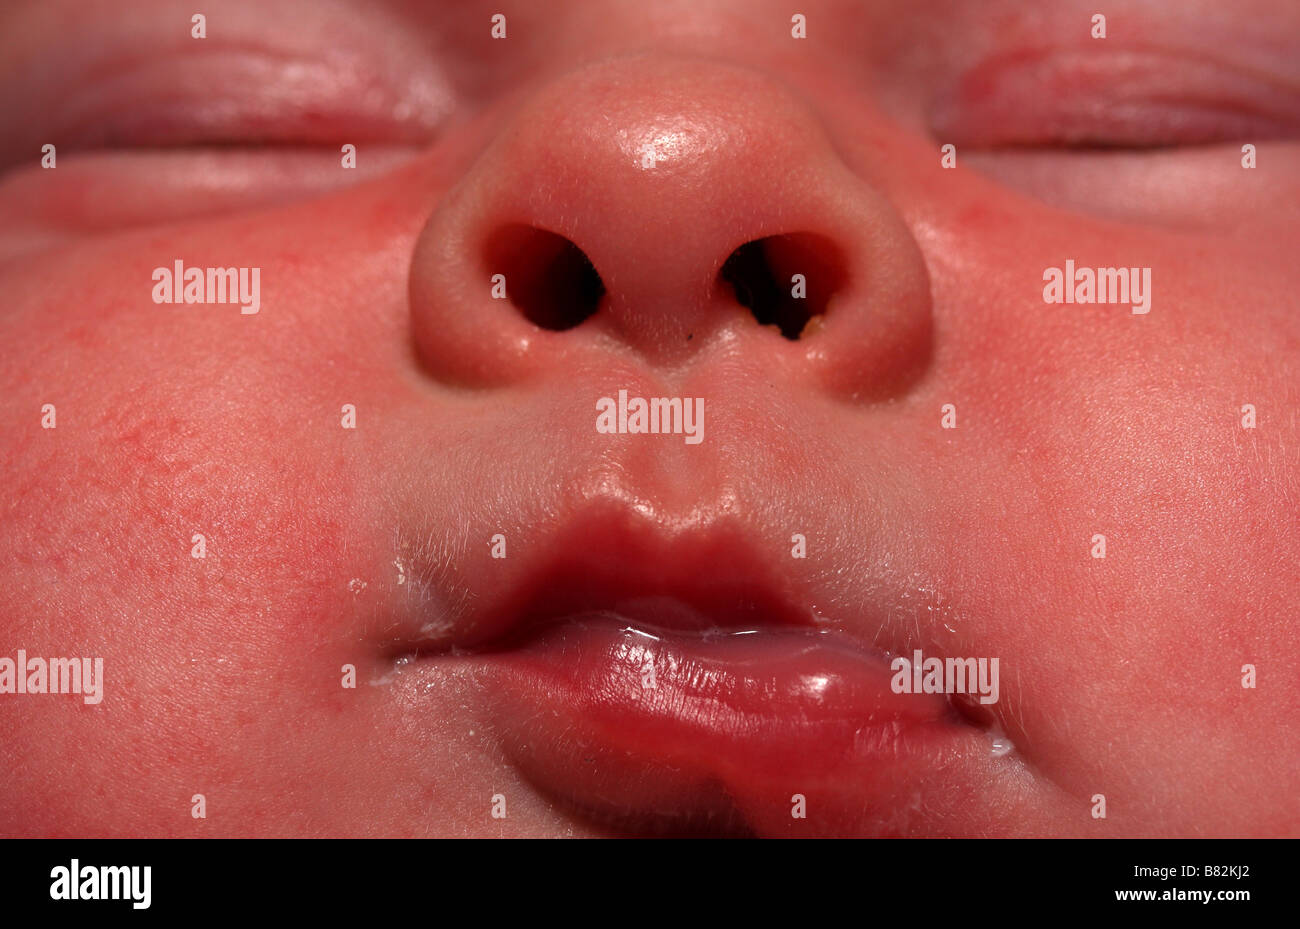 Close up of sleeping baby's face Stock Photo